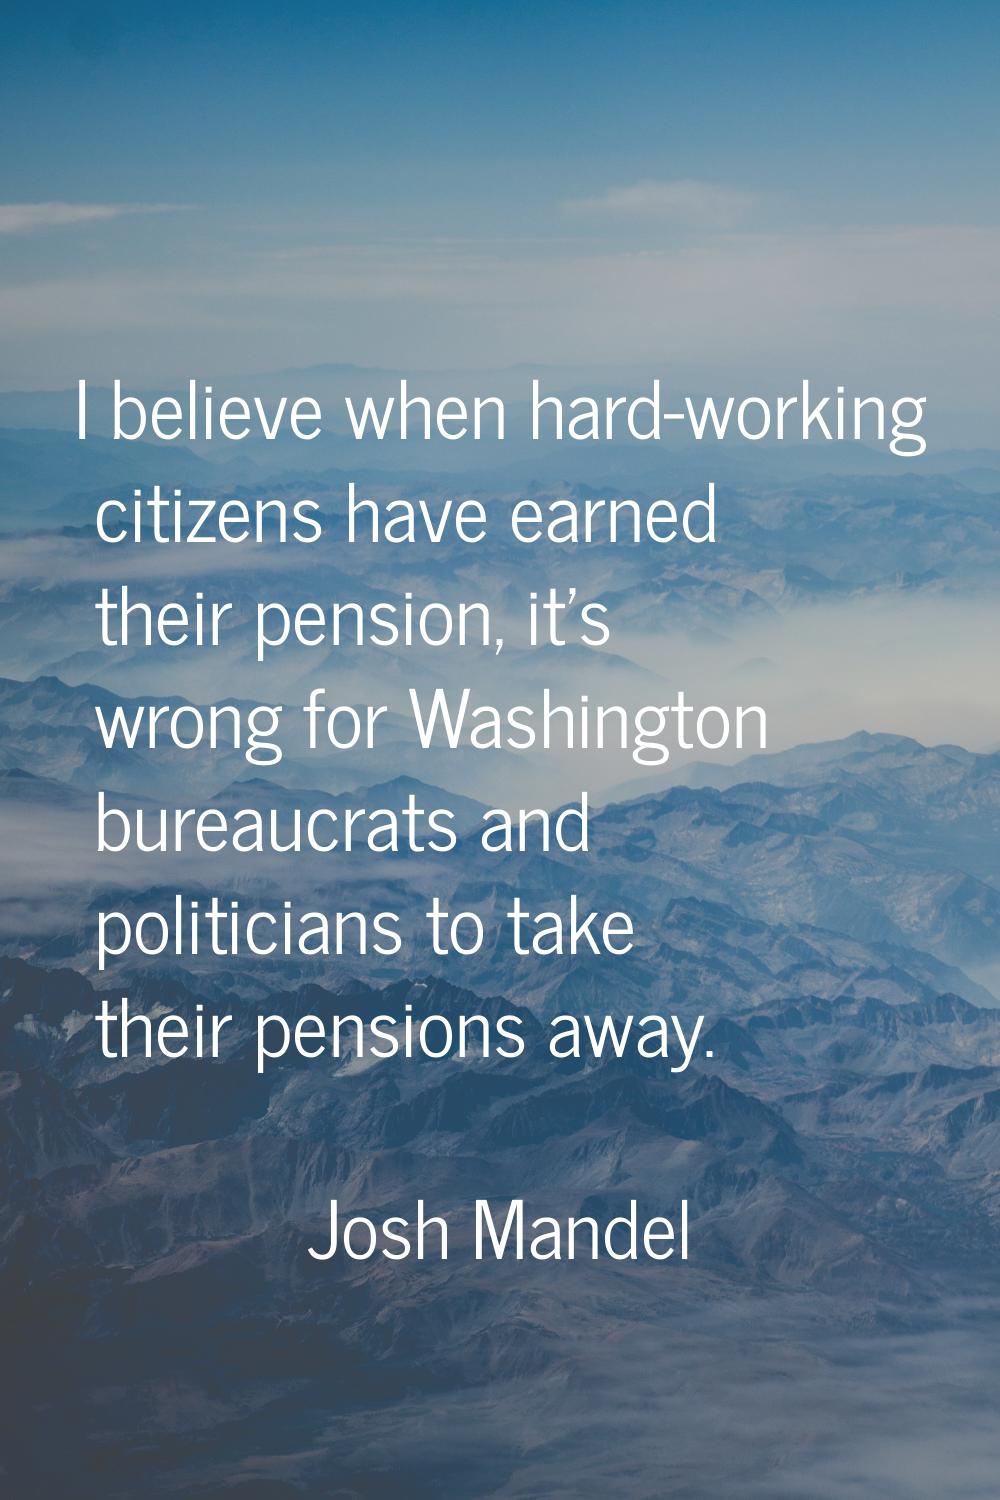 I believe when hard-working citizens have earned their pension, it's wrong for Washington bureaucra